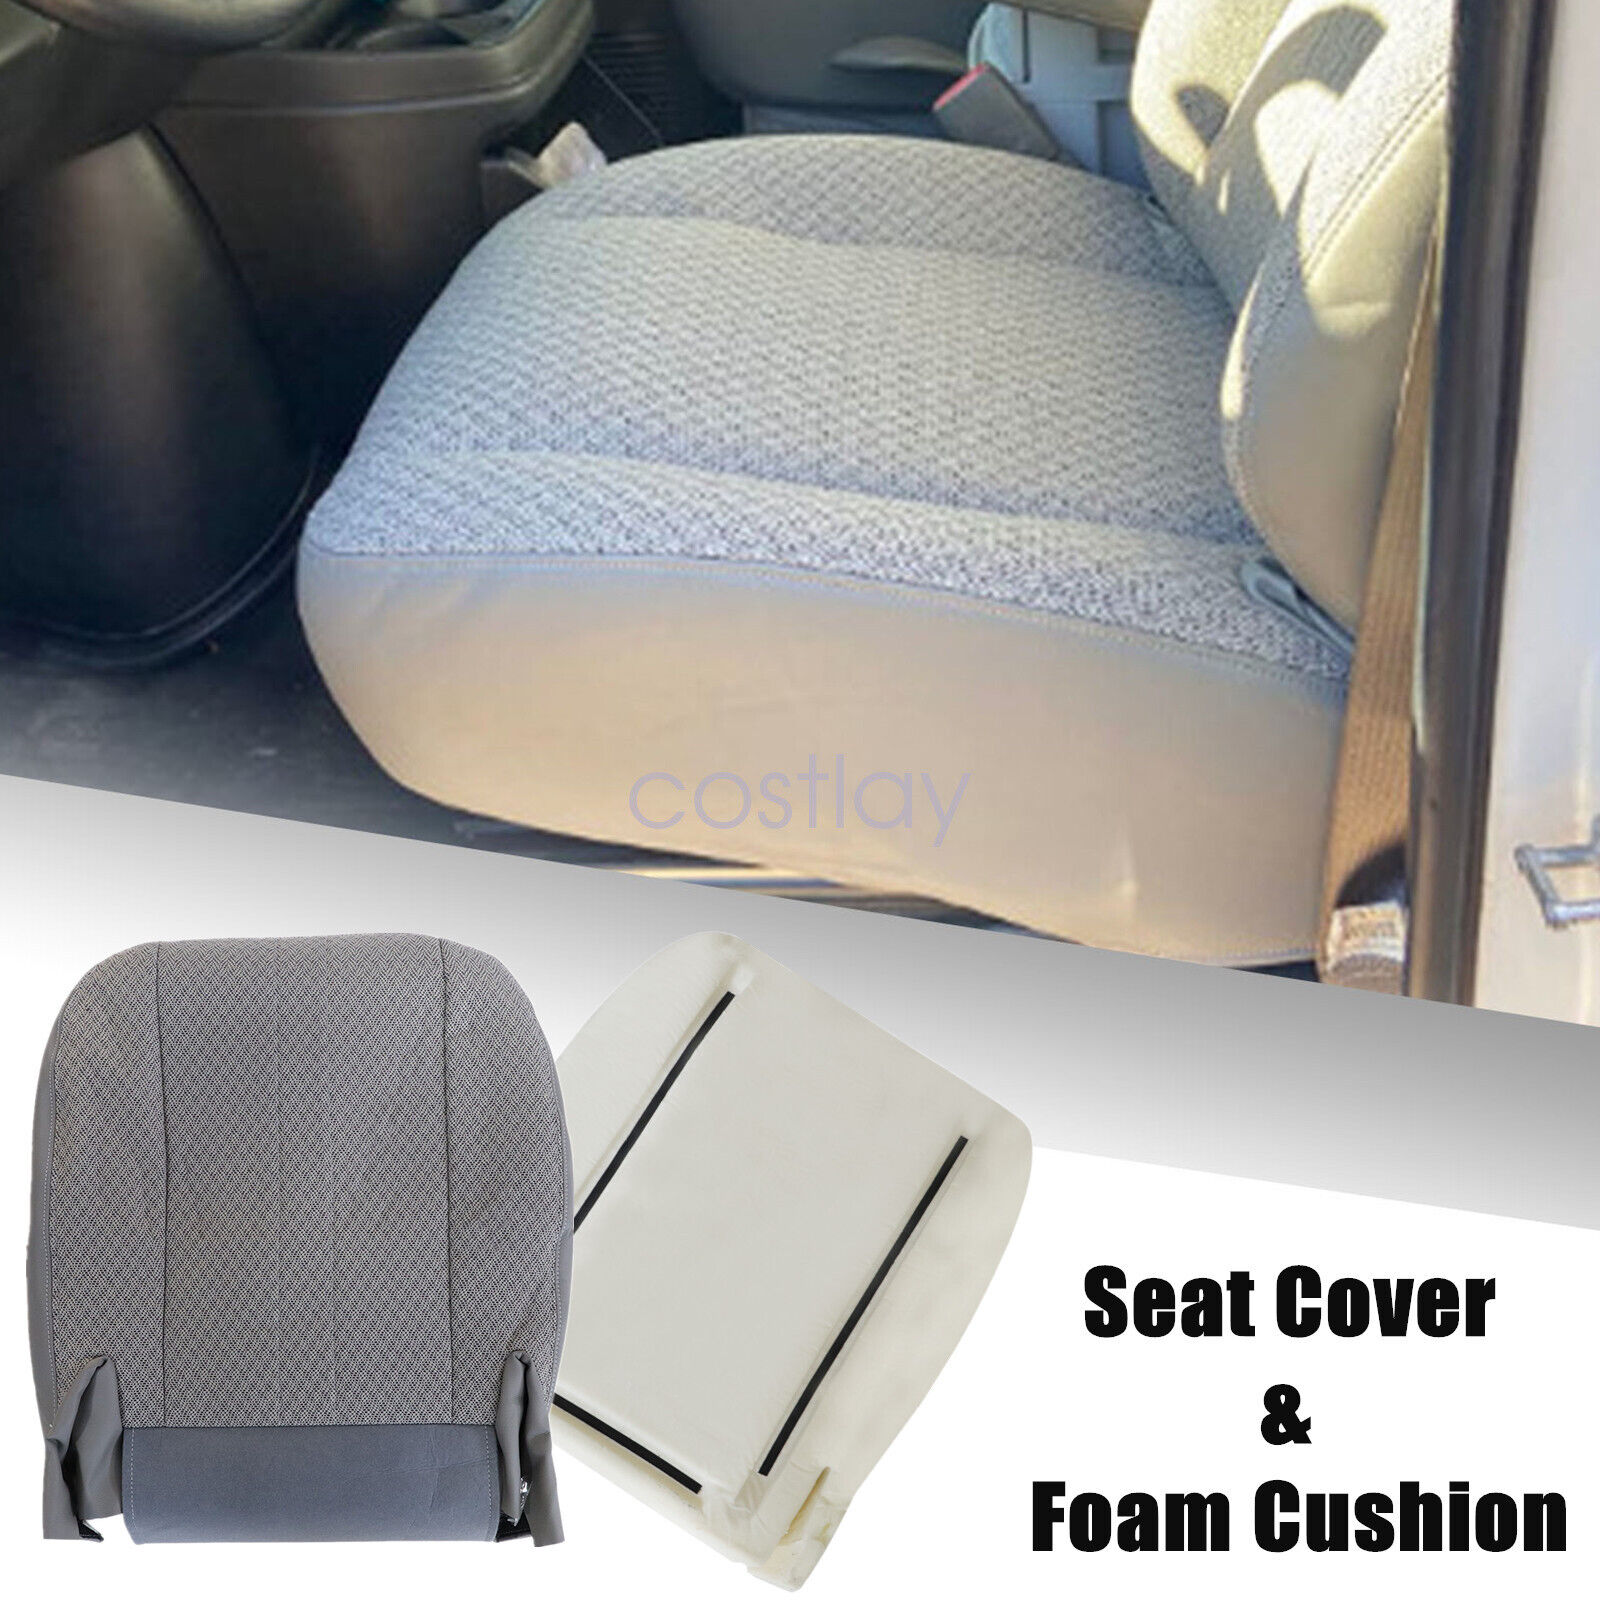 Driver Bottom Seat Cover & Foam Cushion For 2003-2014 Chevy Express & GMC Van